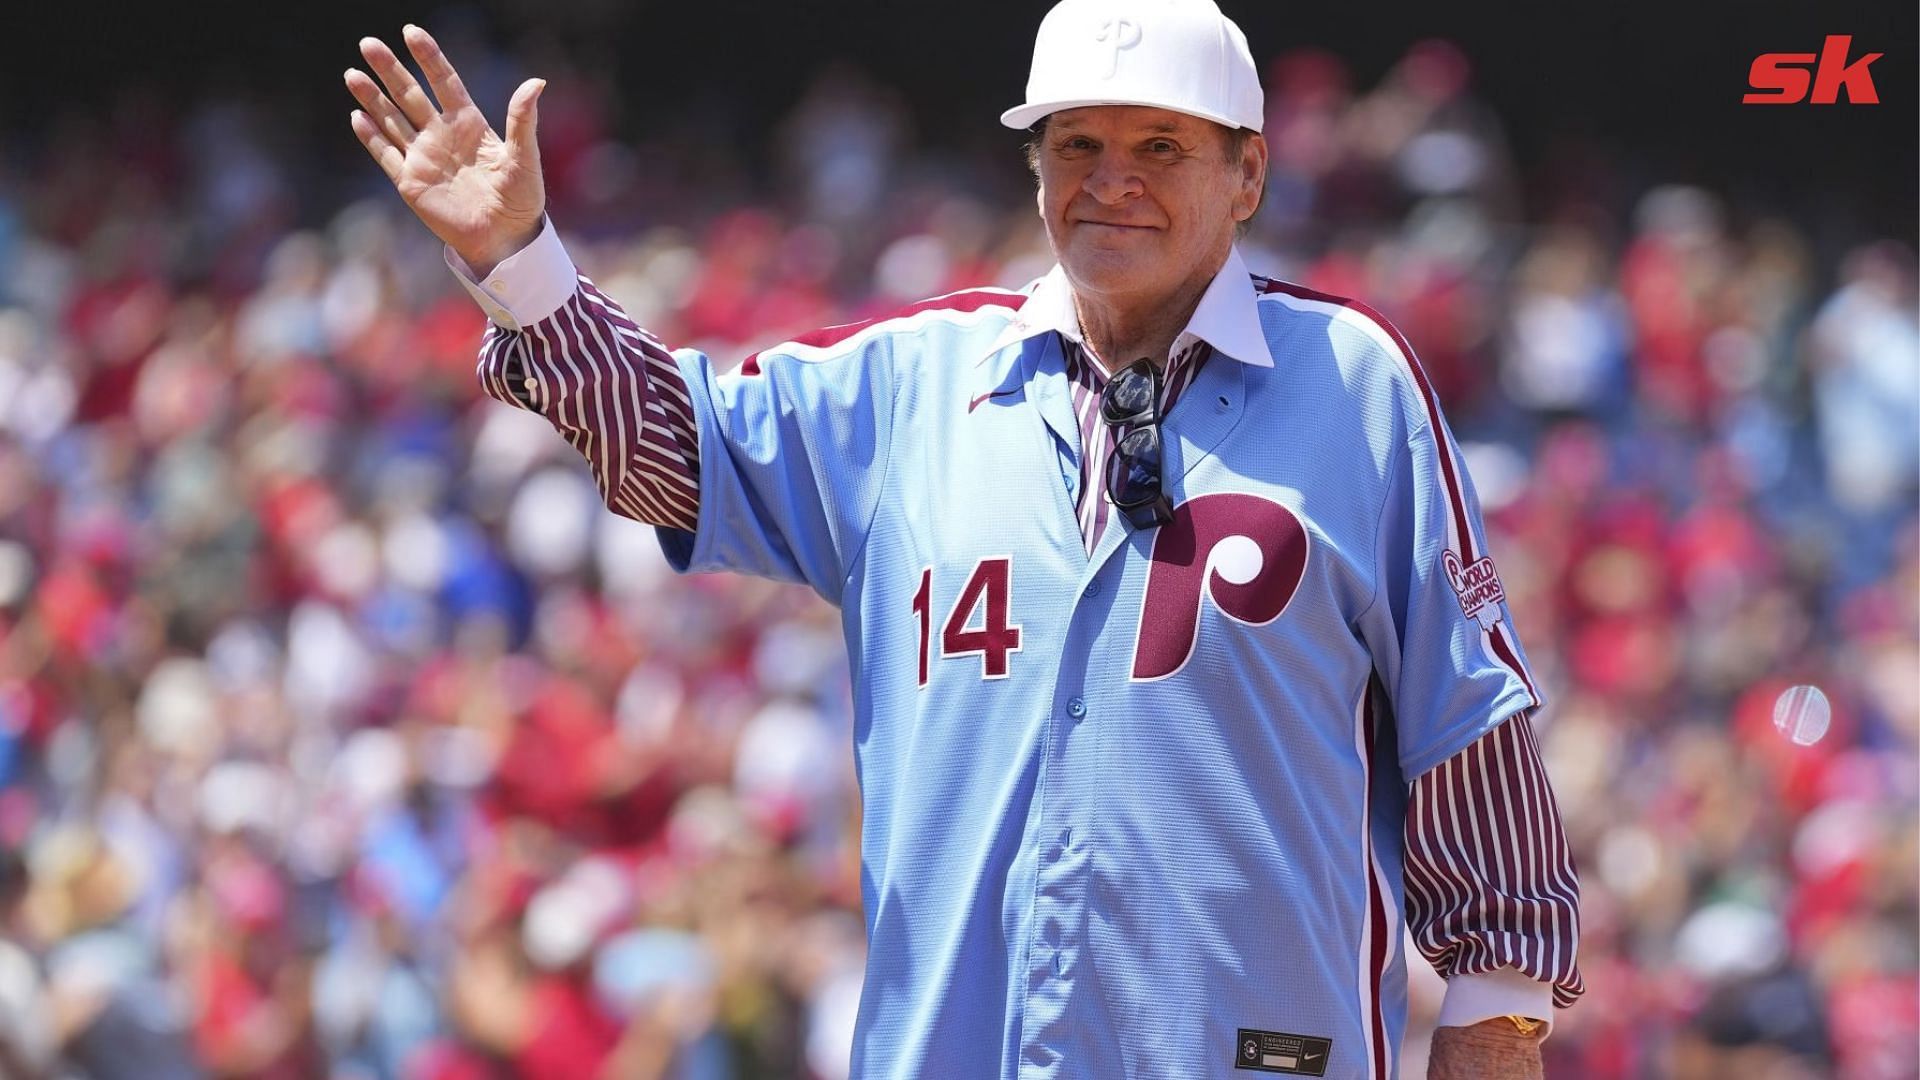 When Pete Rose faced serious backlash after callous response to question on statutory rape charges